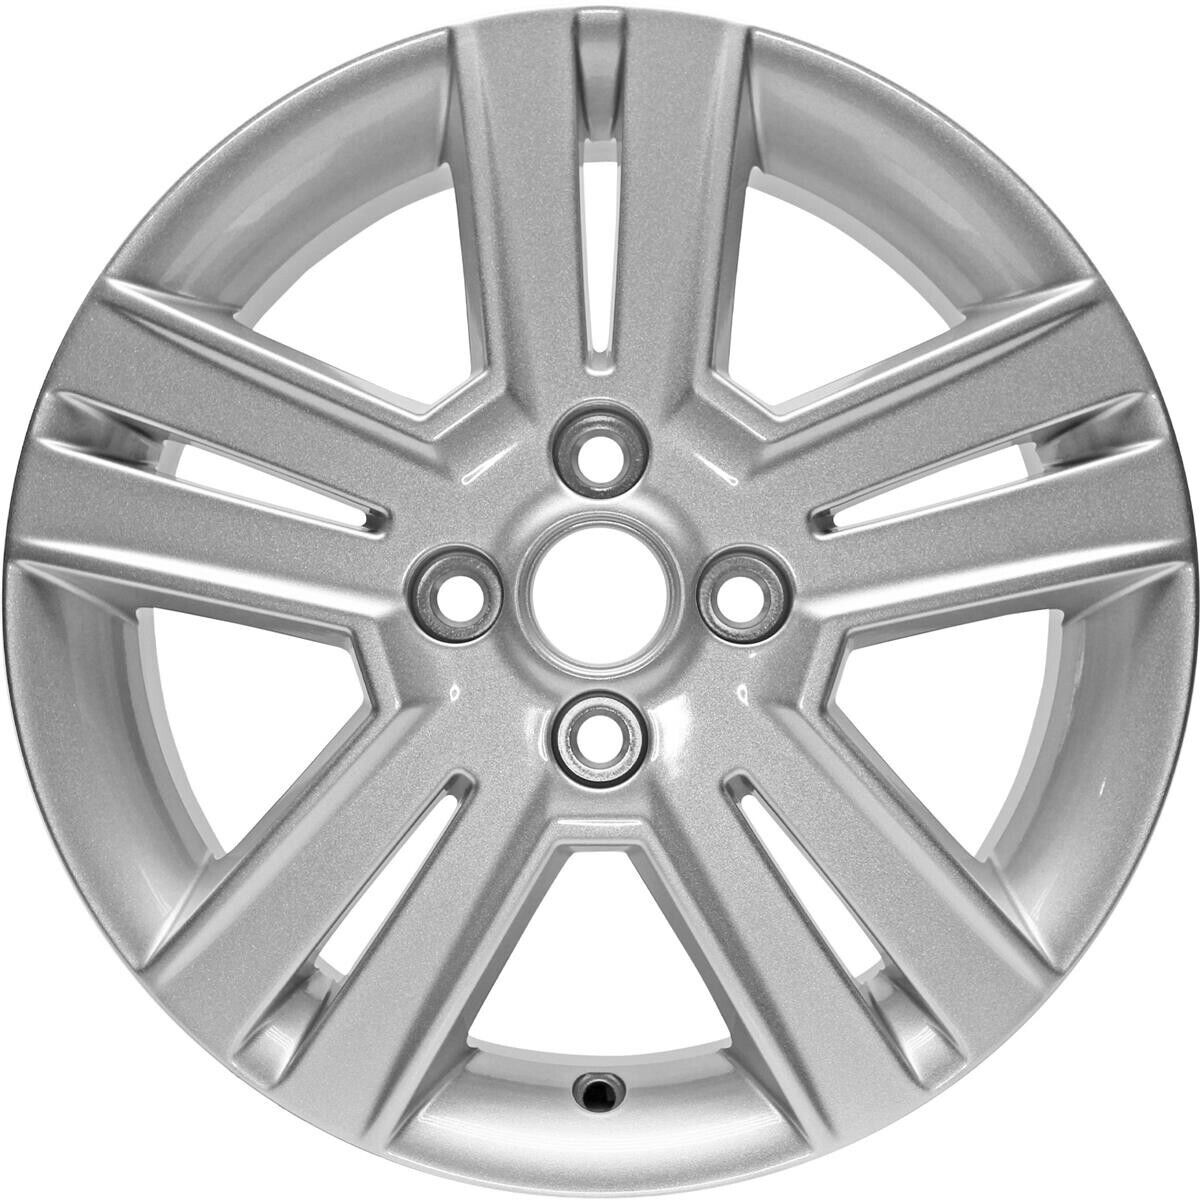 Replacement New Alloy Wheel For 2013-2015 Chevrolet Spark 15X6 Inch Silver Rim